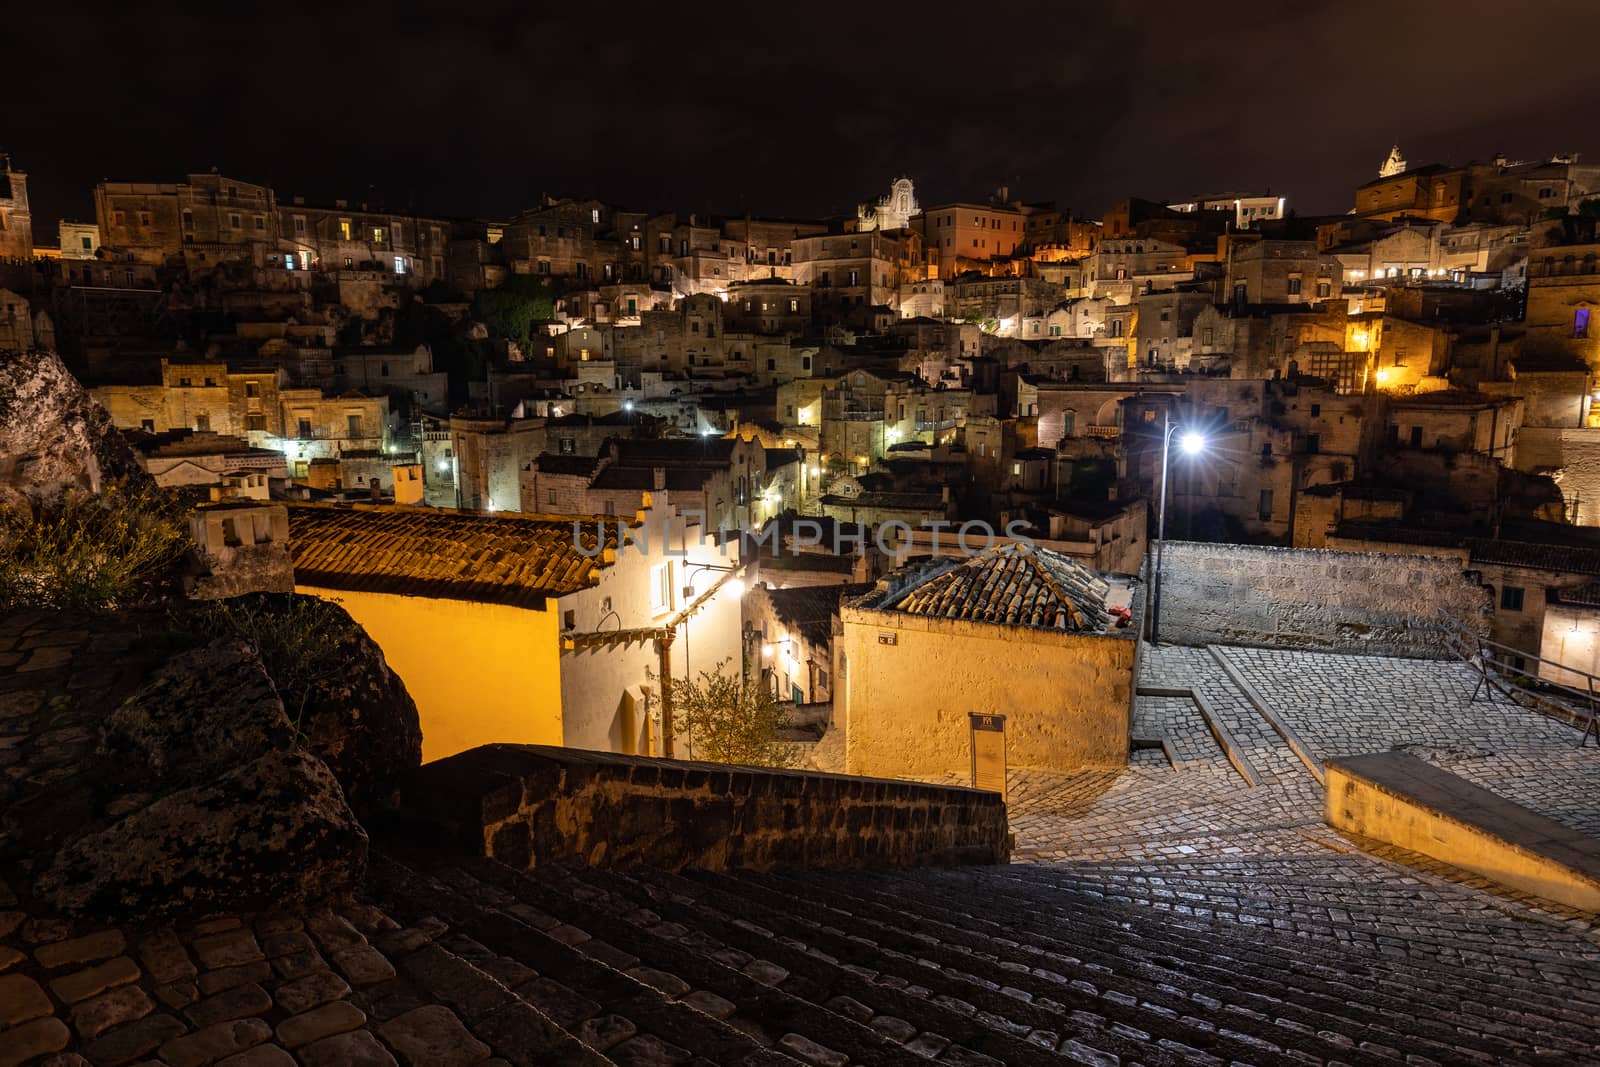 Amazing lighted buildings in ancient Sassi district by night in Matera, Basilicata. Italy by wjarek